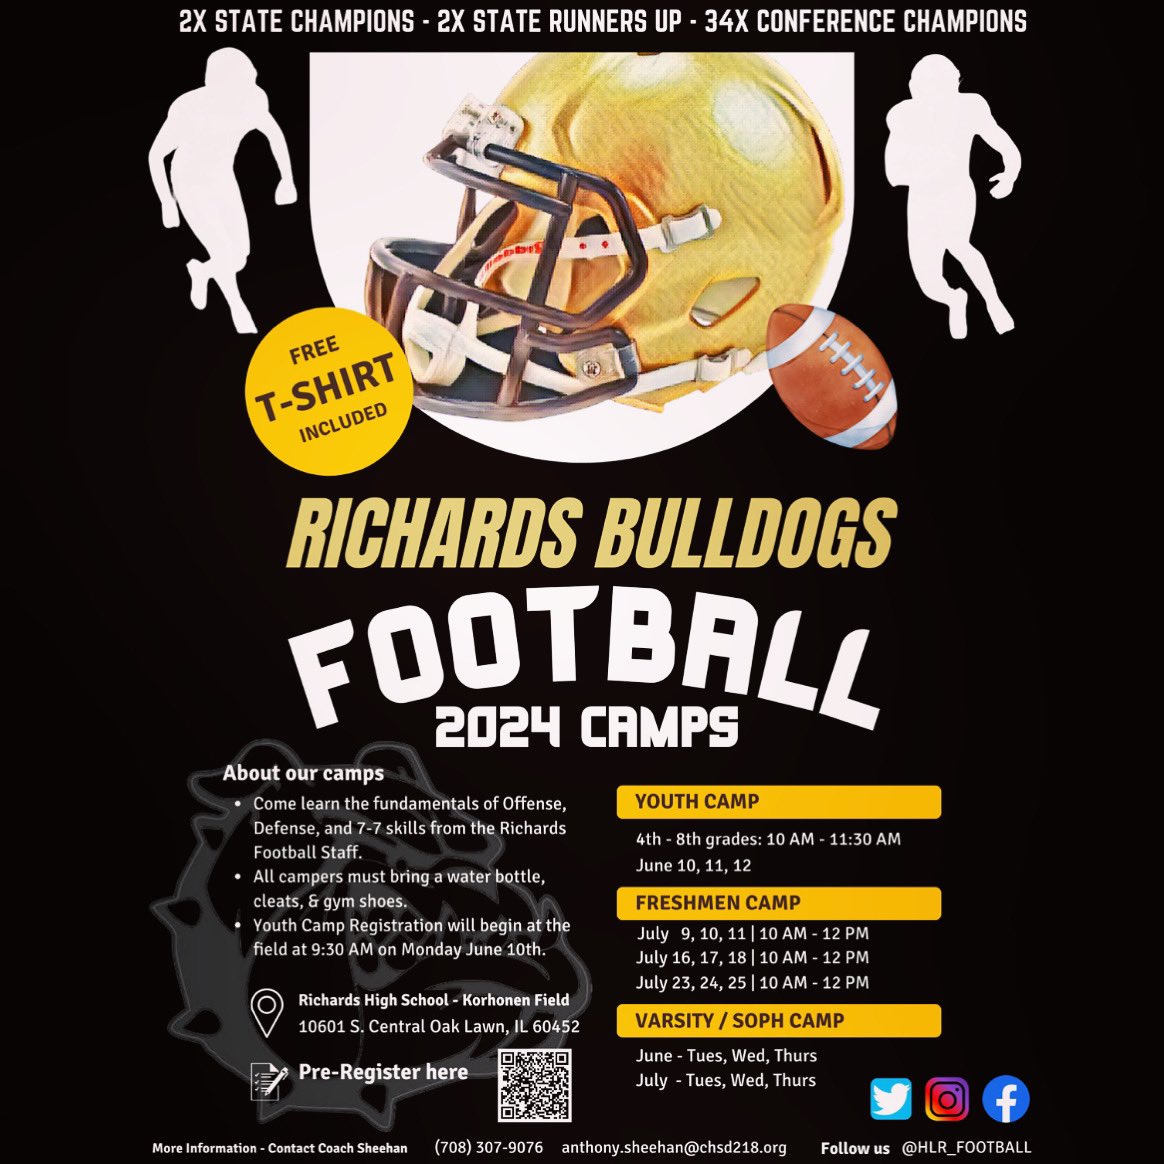 Attention future & current Bulldogs: This upcoming summer the HLR 🏈 coaching staff will host a variety of 🏈 camps this summer. Details about registration & dates are attached: For more info contact HC Tony Sheehan Anthony.Sheehan@chsd218.org @CoachShen docs.google.com/forms/d/e/1FAI…